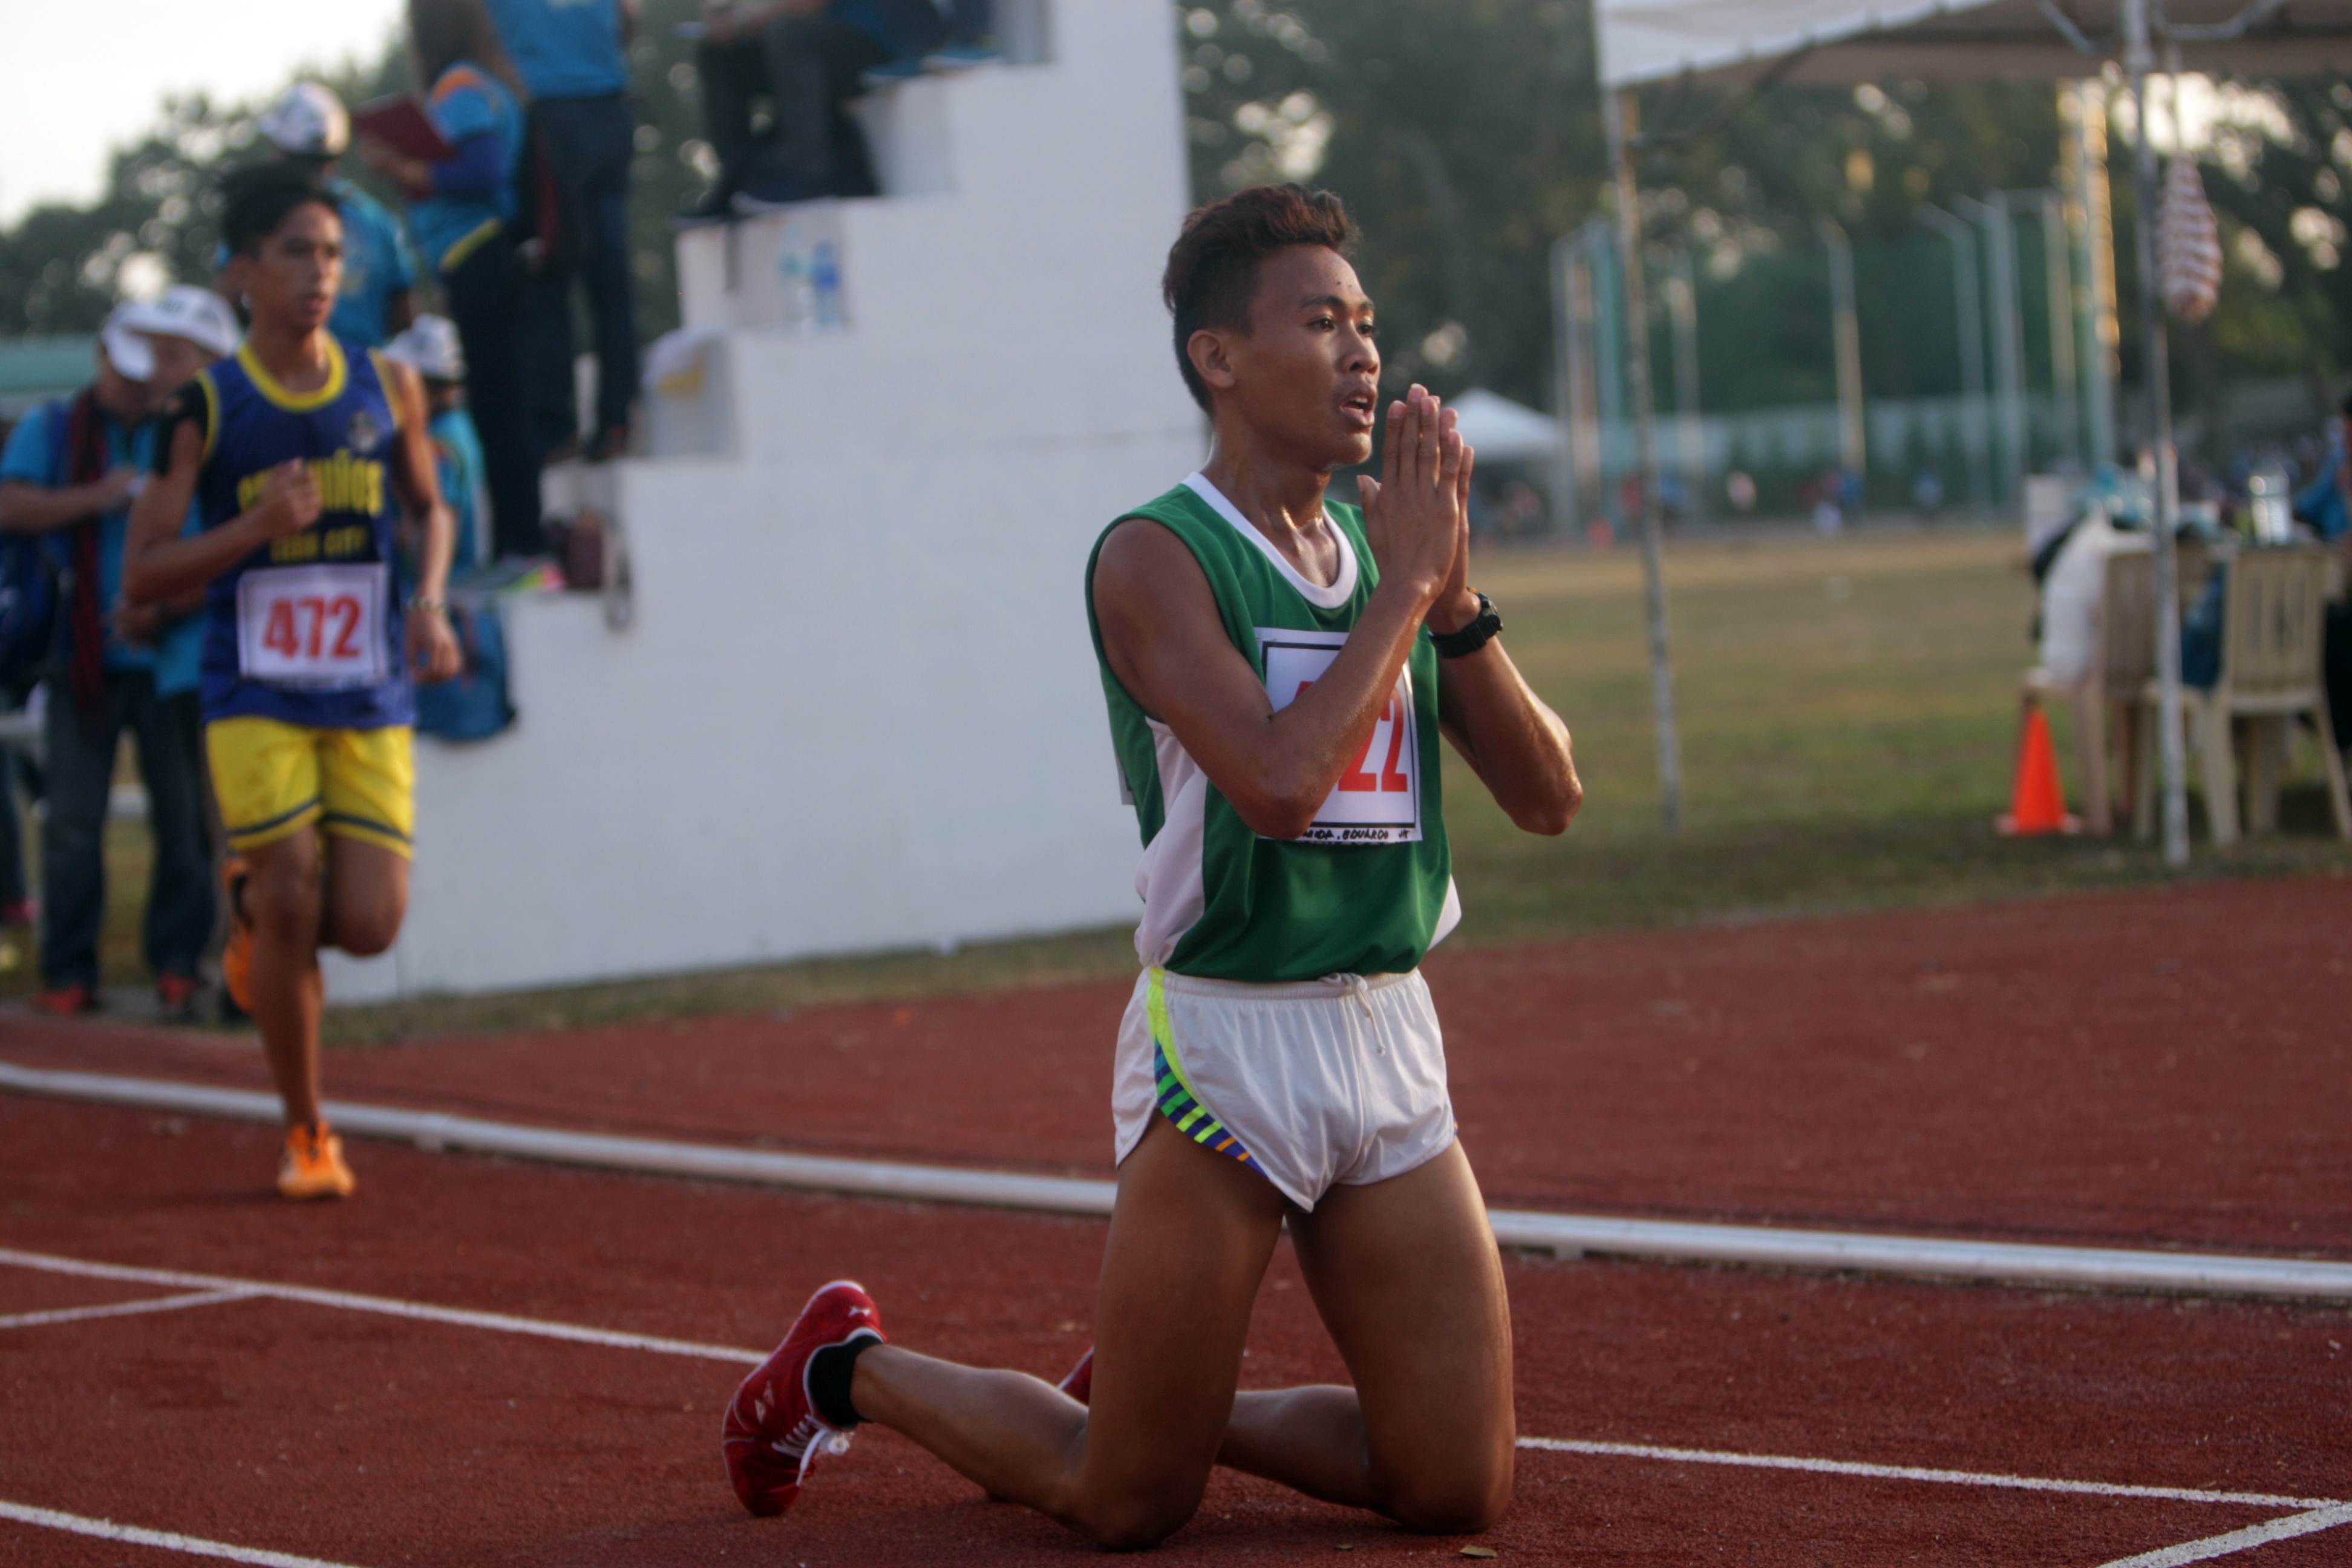 CVIRAA 2017/FEB 13,2017: Eduardo Milmida of Province of Bohol thanks God after crossing the finish line to win the gold in the Staple chase event of the CVIRAA 2017 at Teodoro Mendiola Sr Sports Oval in the City of Naga. (CDN PHOTO/TONEE DESPOJO)